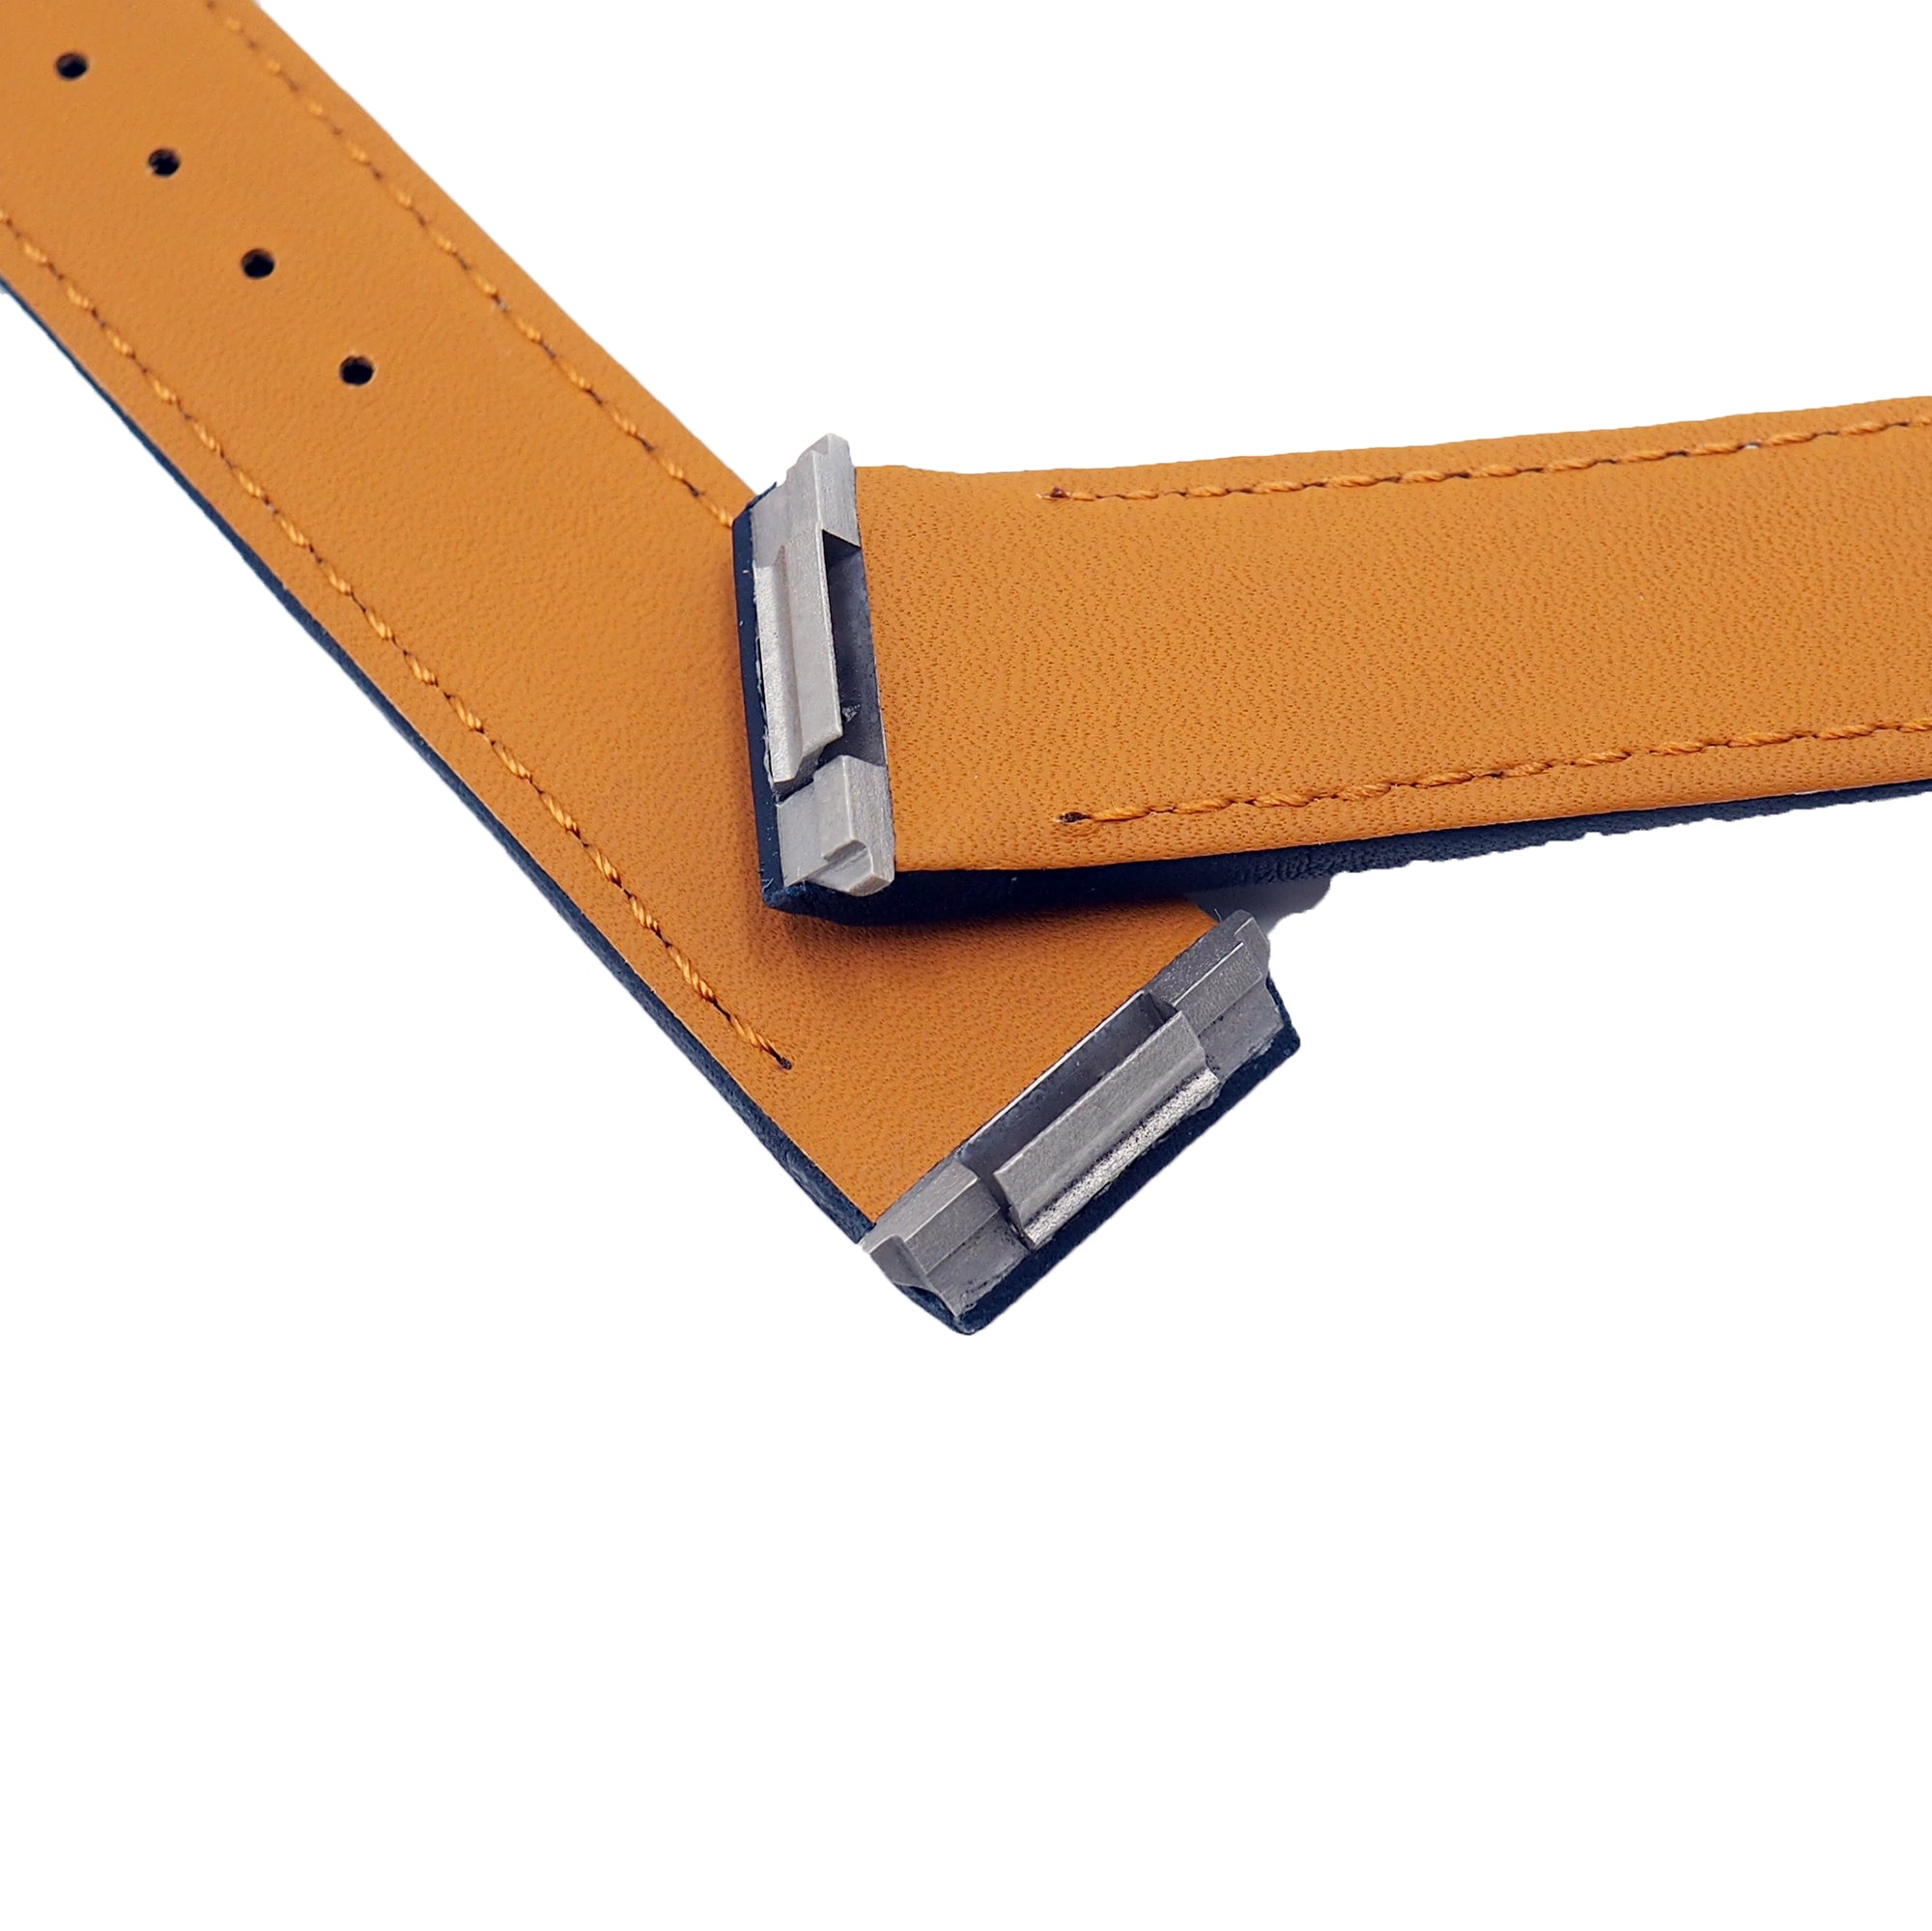 Nylon Watch Straps for Cartier Roadster